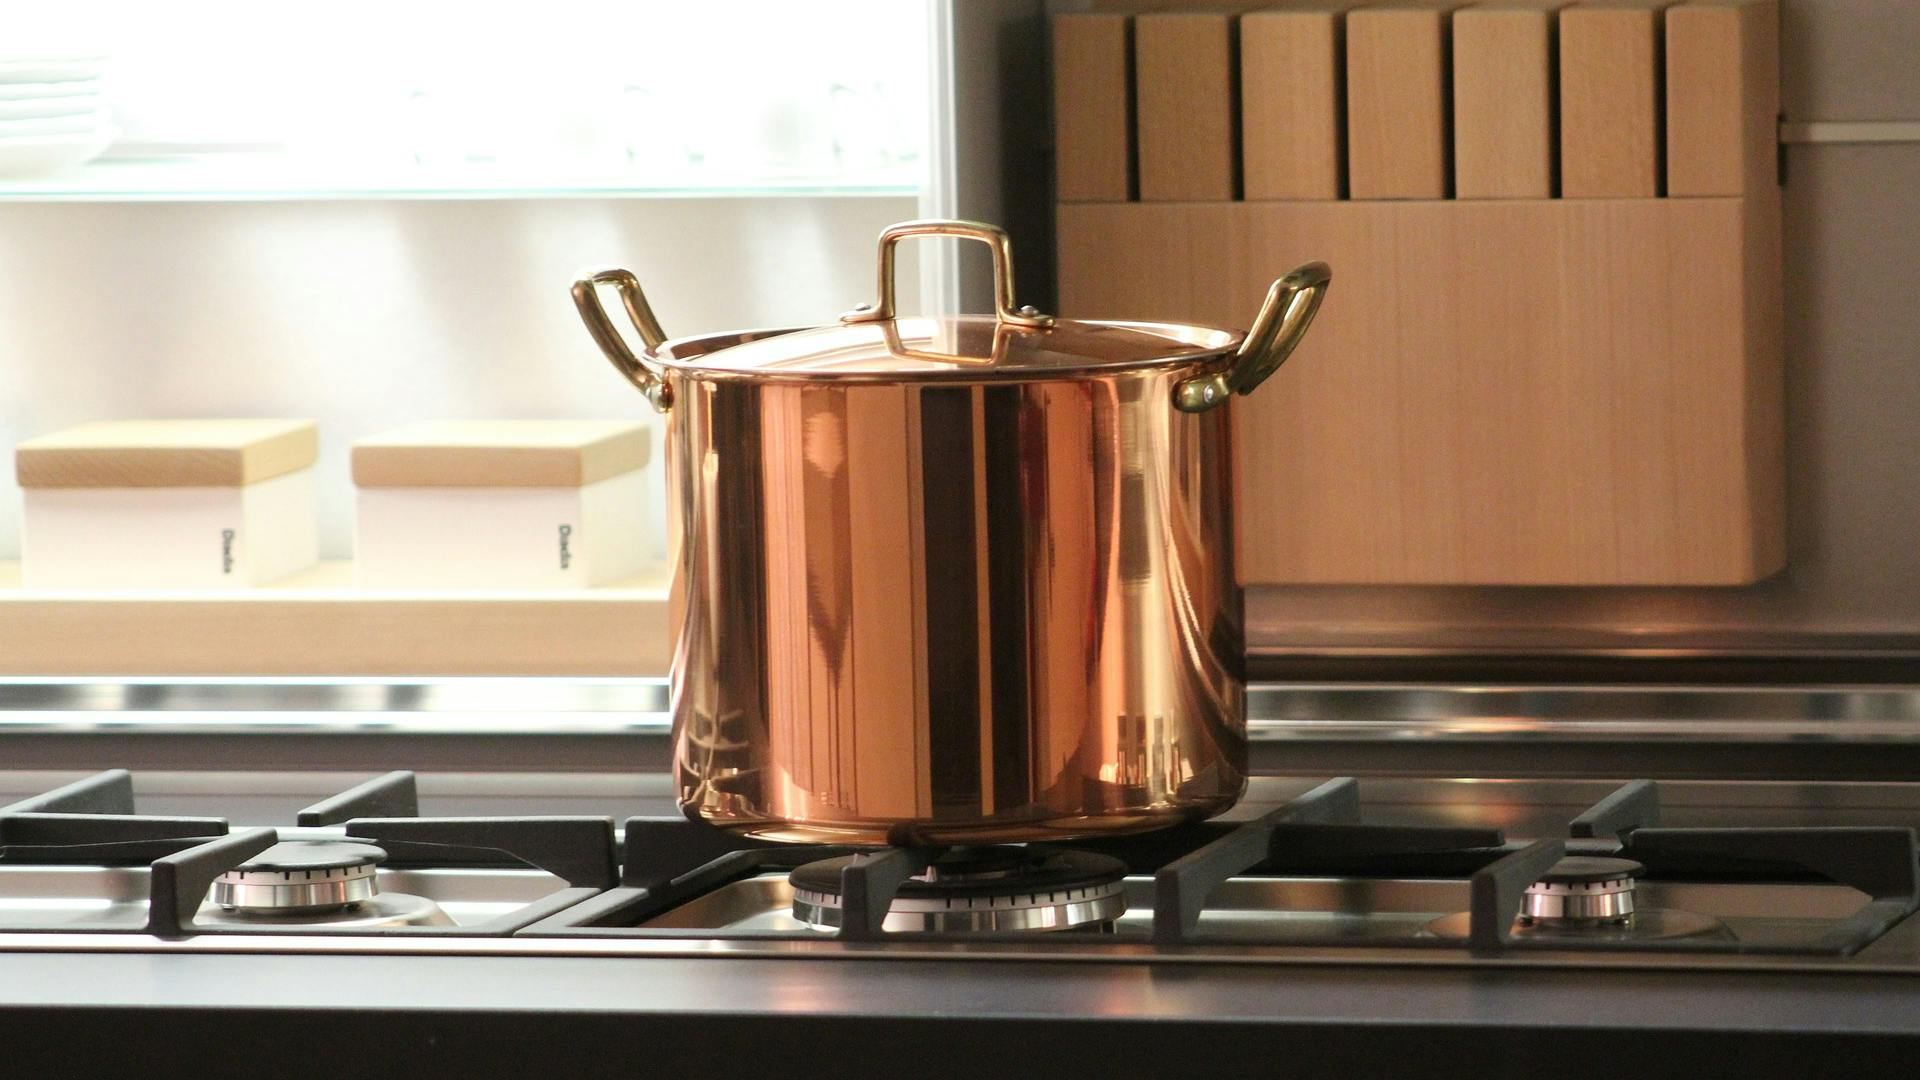 A stockpot with a full copper exterior.